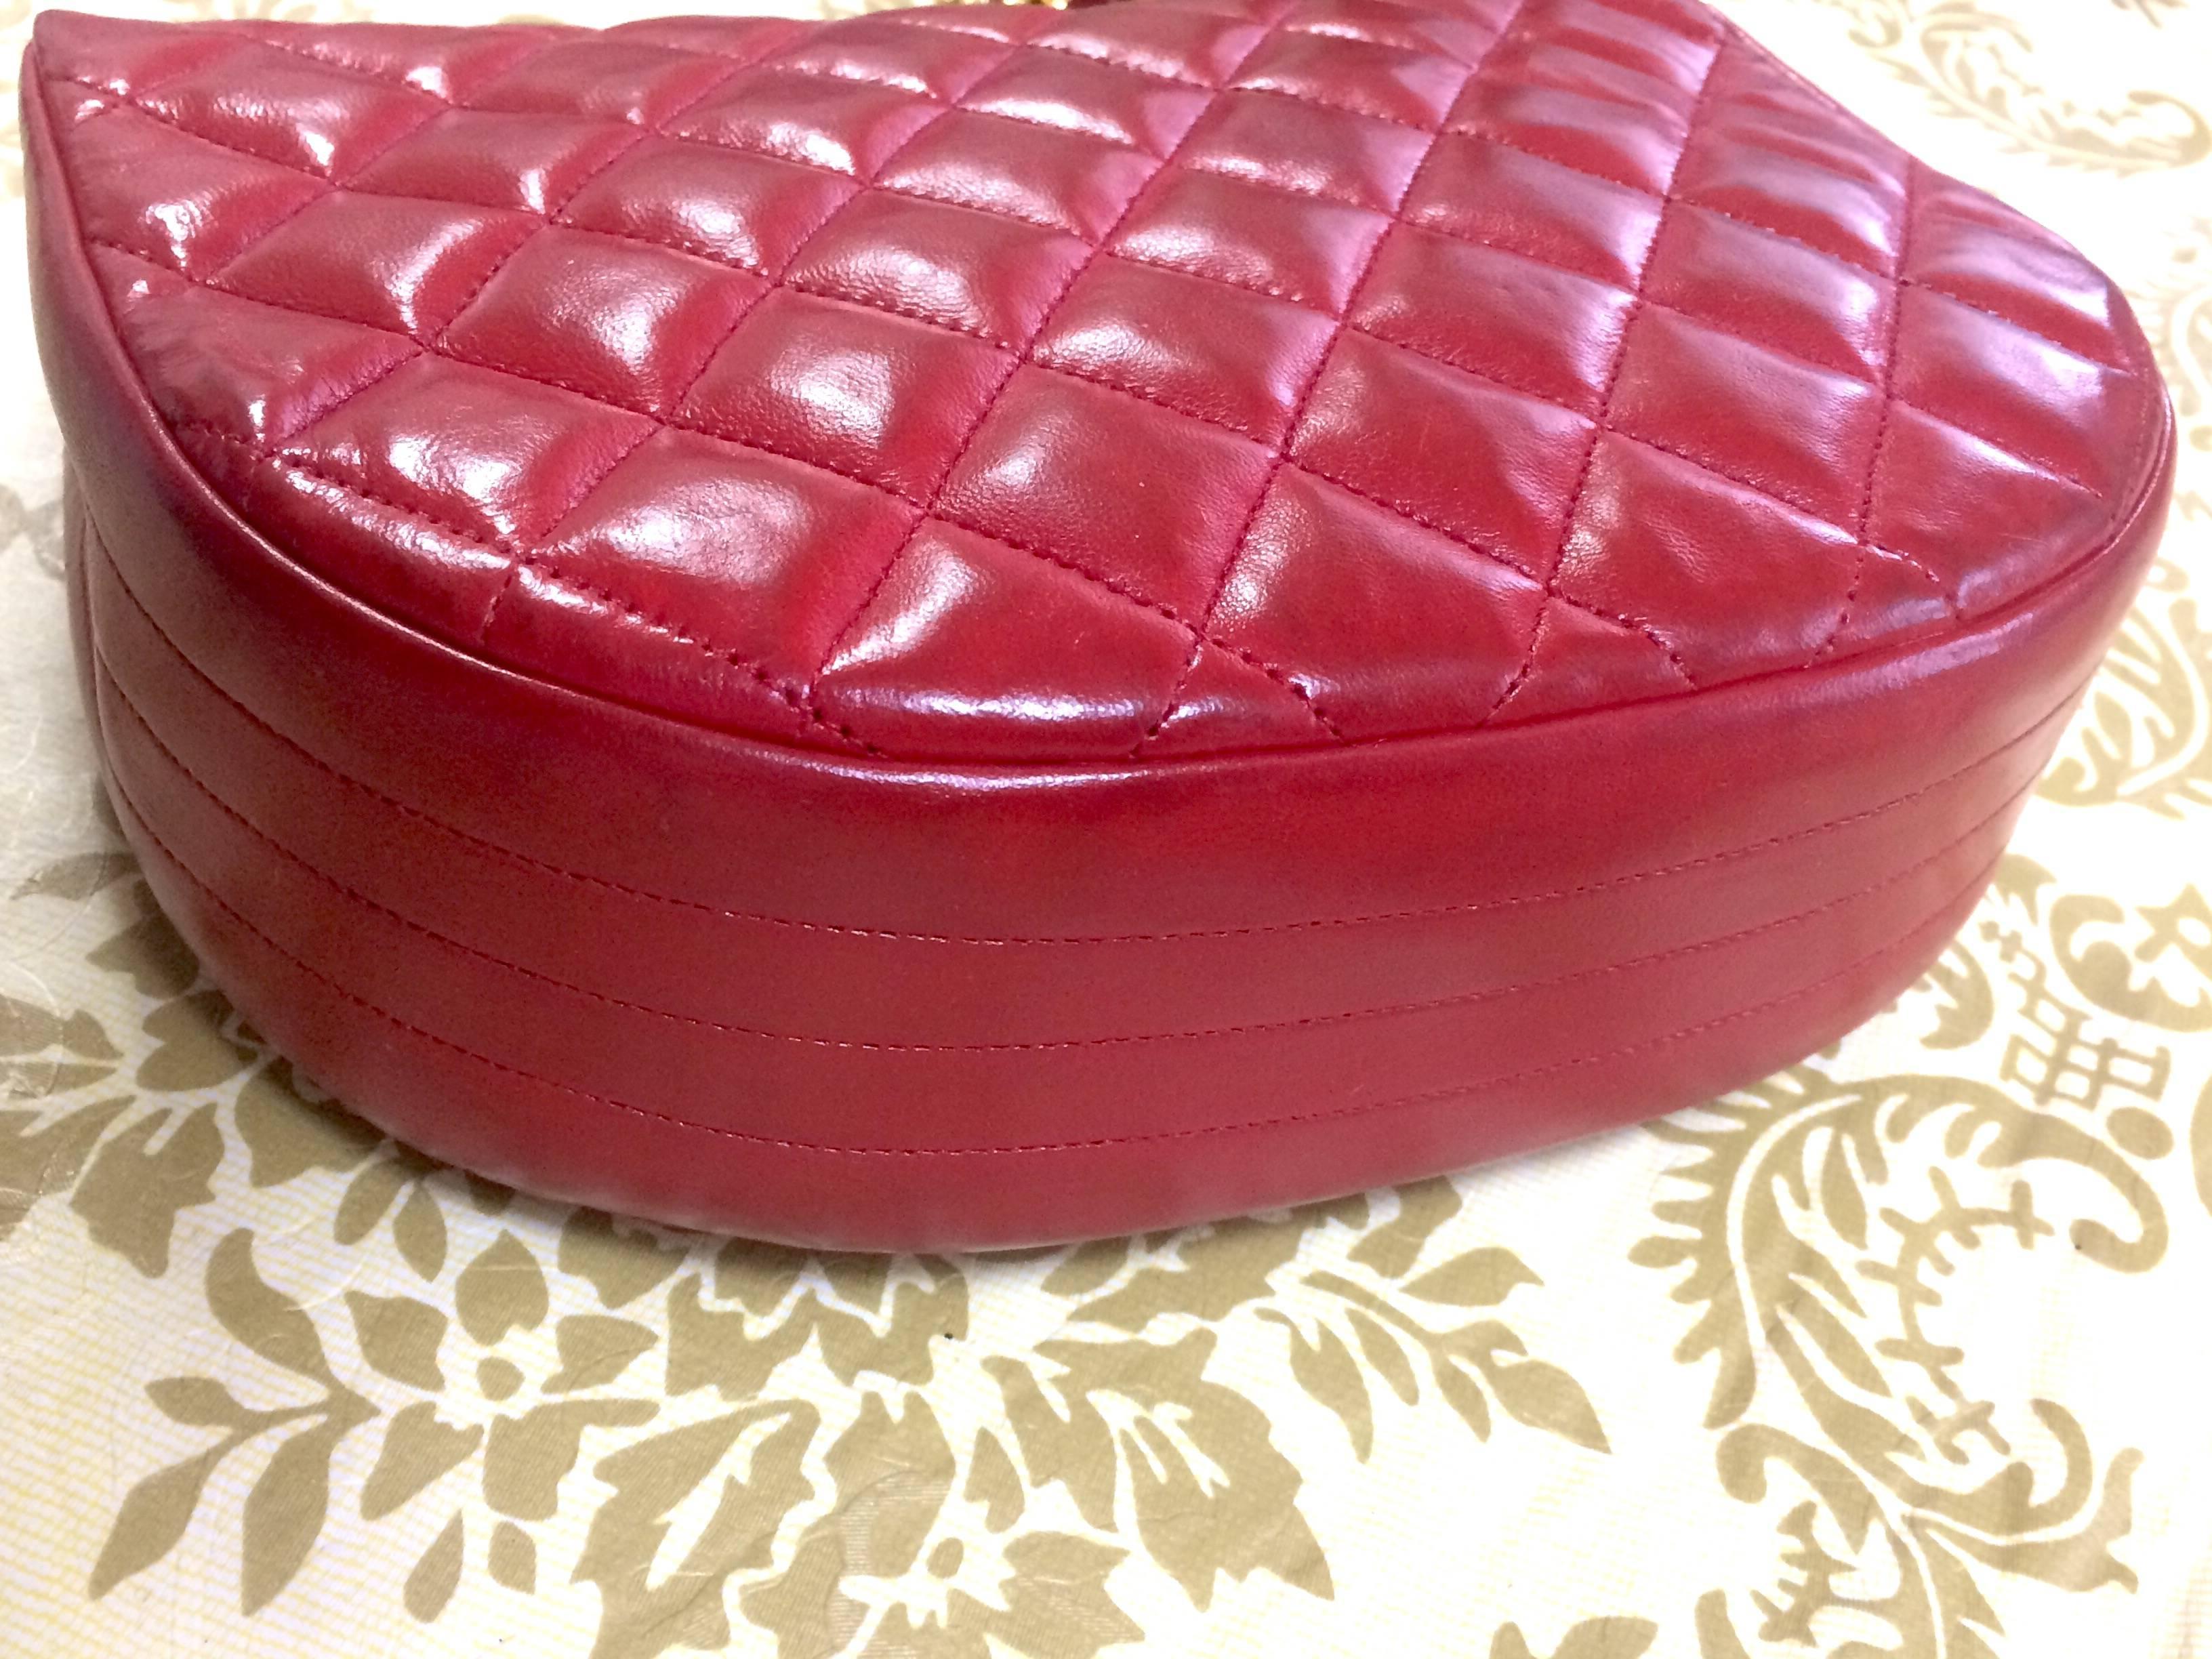 Women's Vintage CHANEL rare red lambskin oval flap 2.55 shoulder bag with large gold CC. For Sale